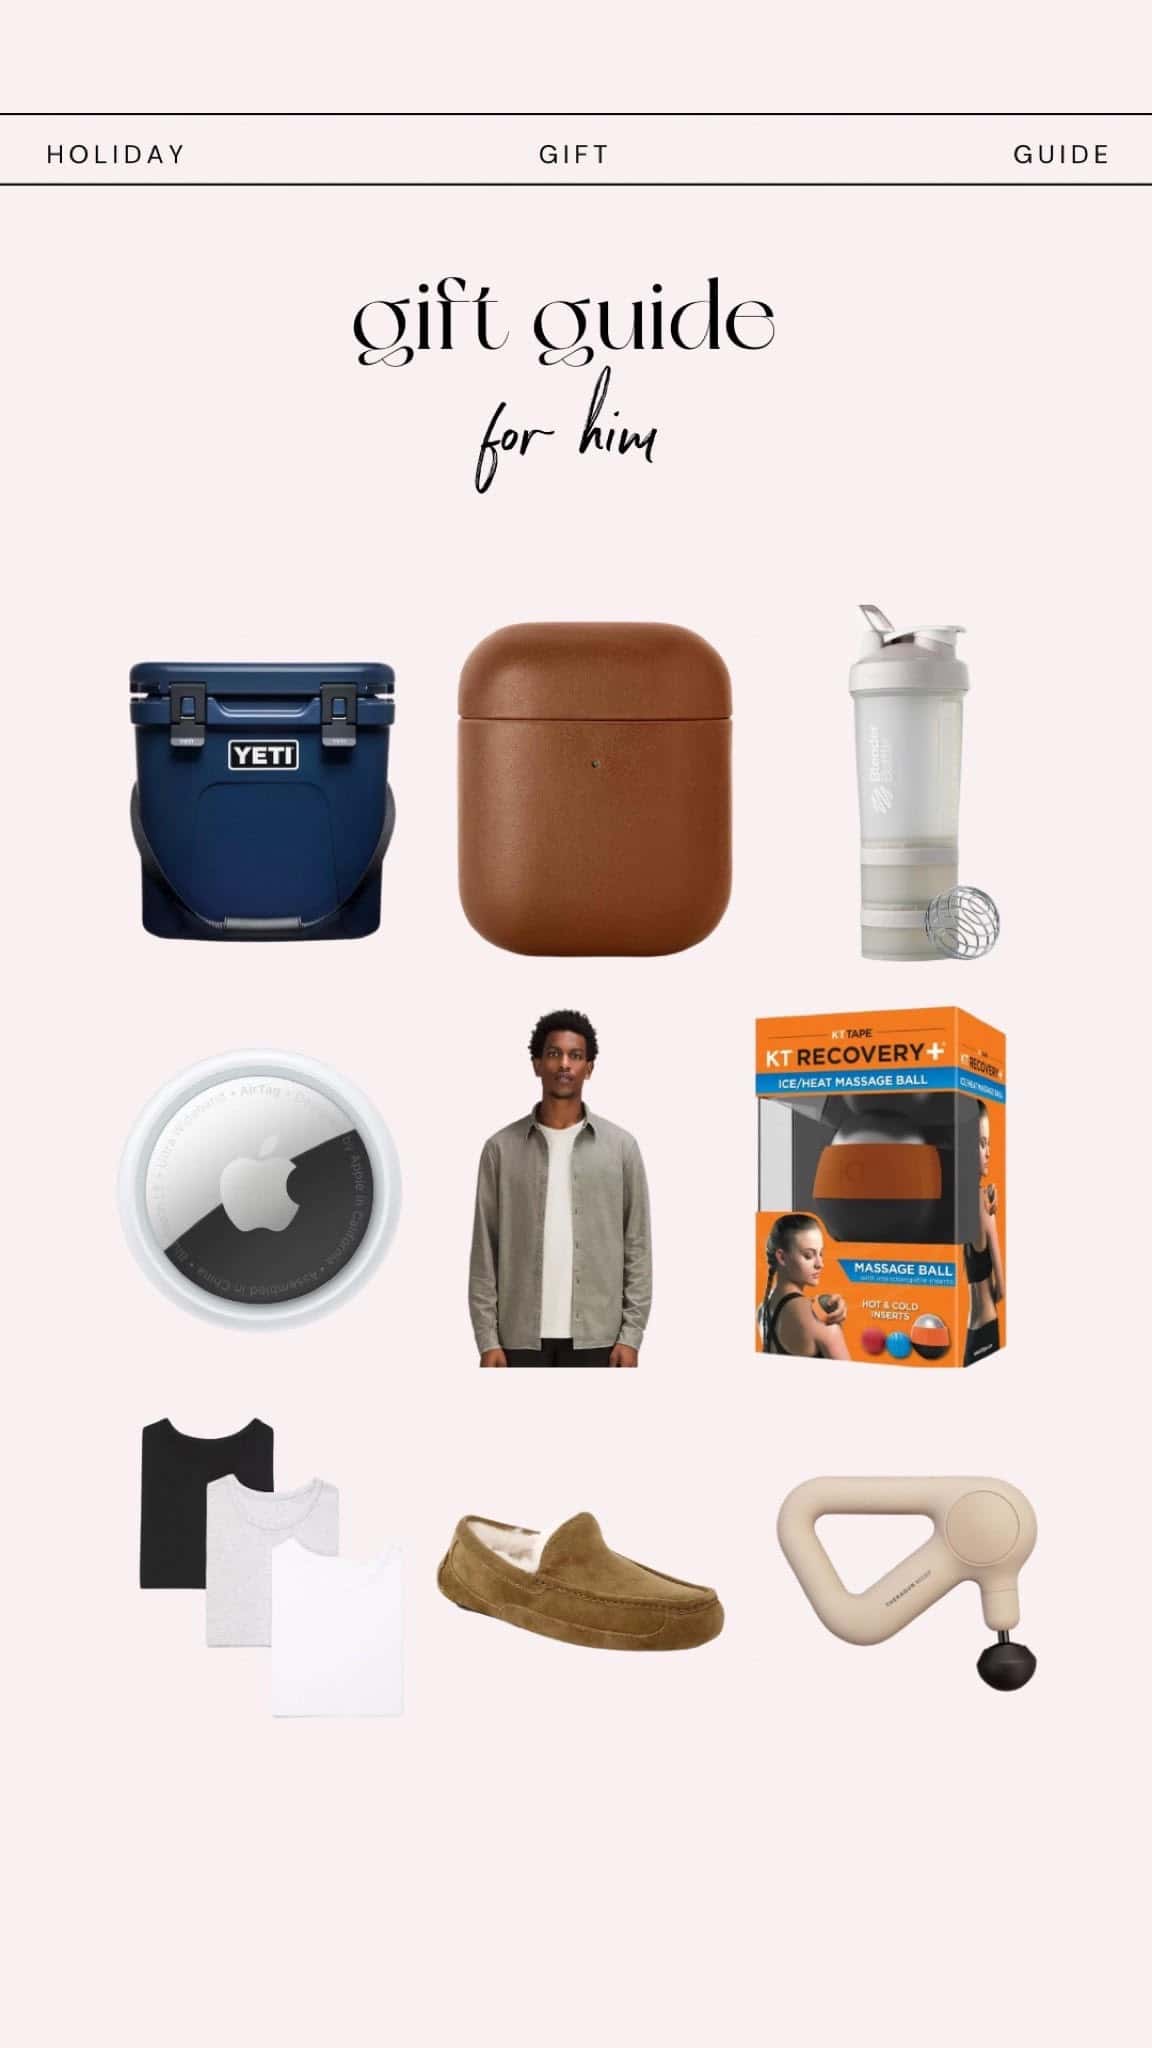 picture of items in the gift guide